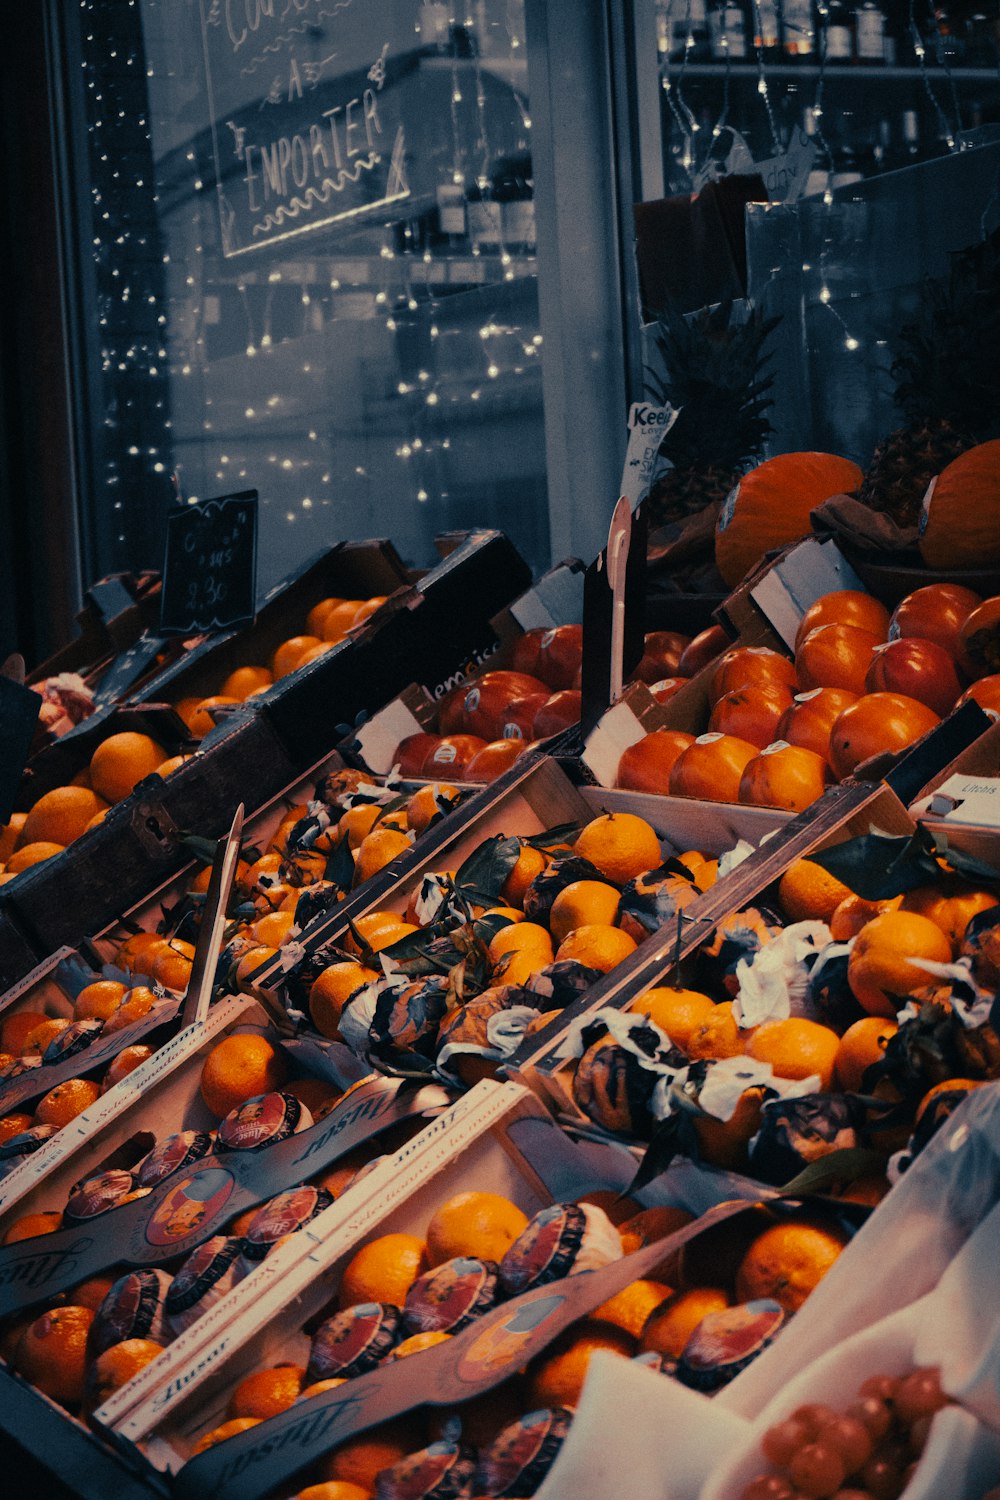 a display of oranges in a store window